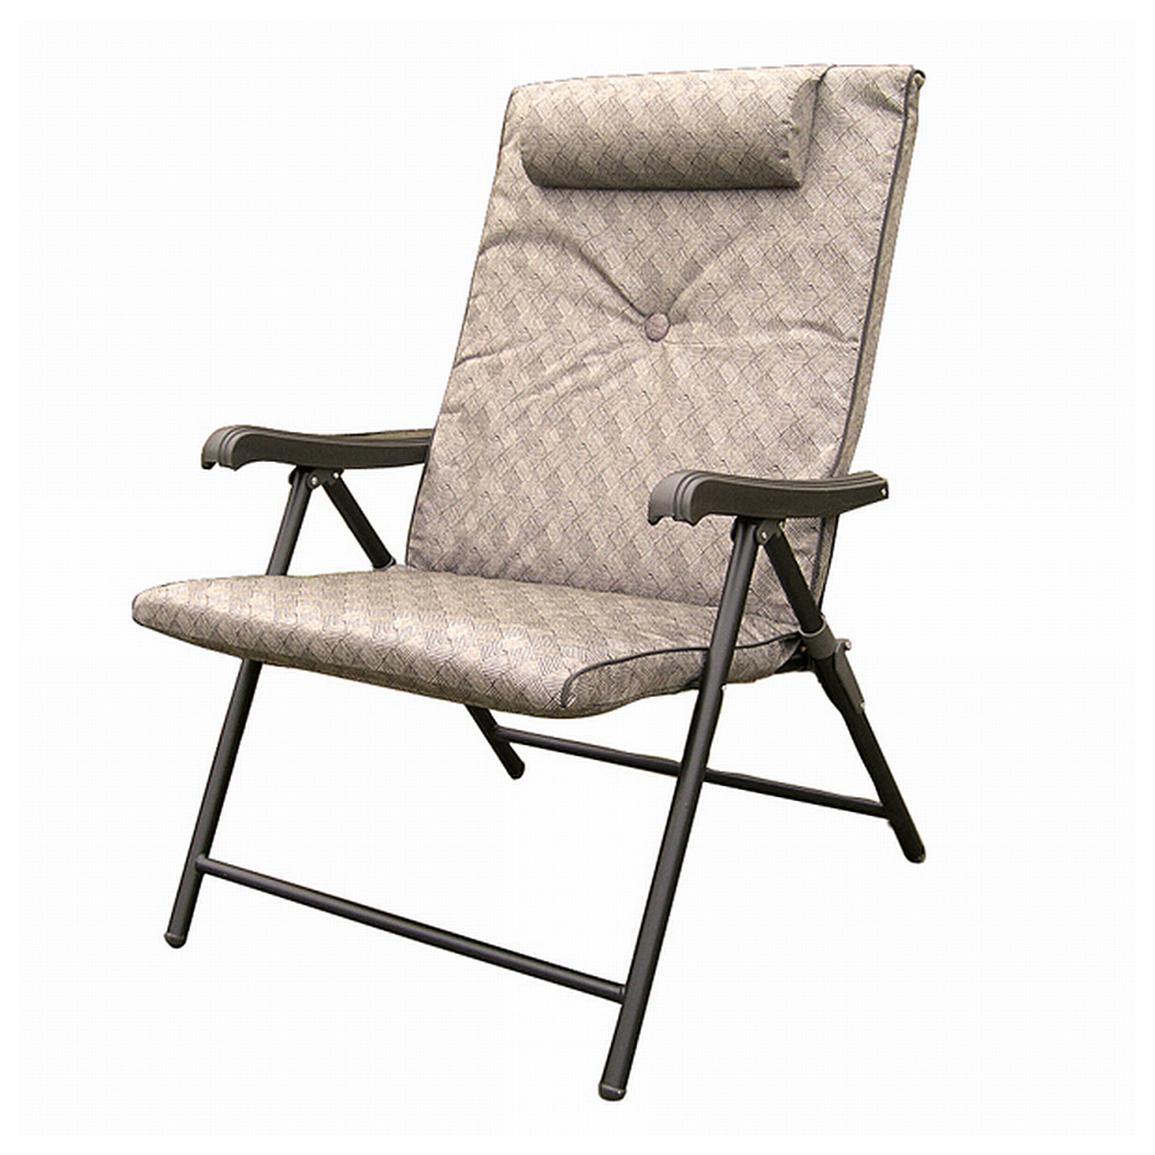 Prime Plus Folding Chair, Brown - 425485, Chairs at ...